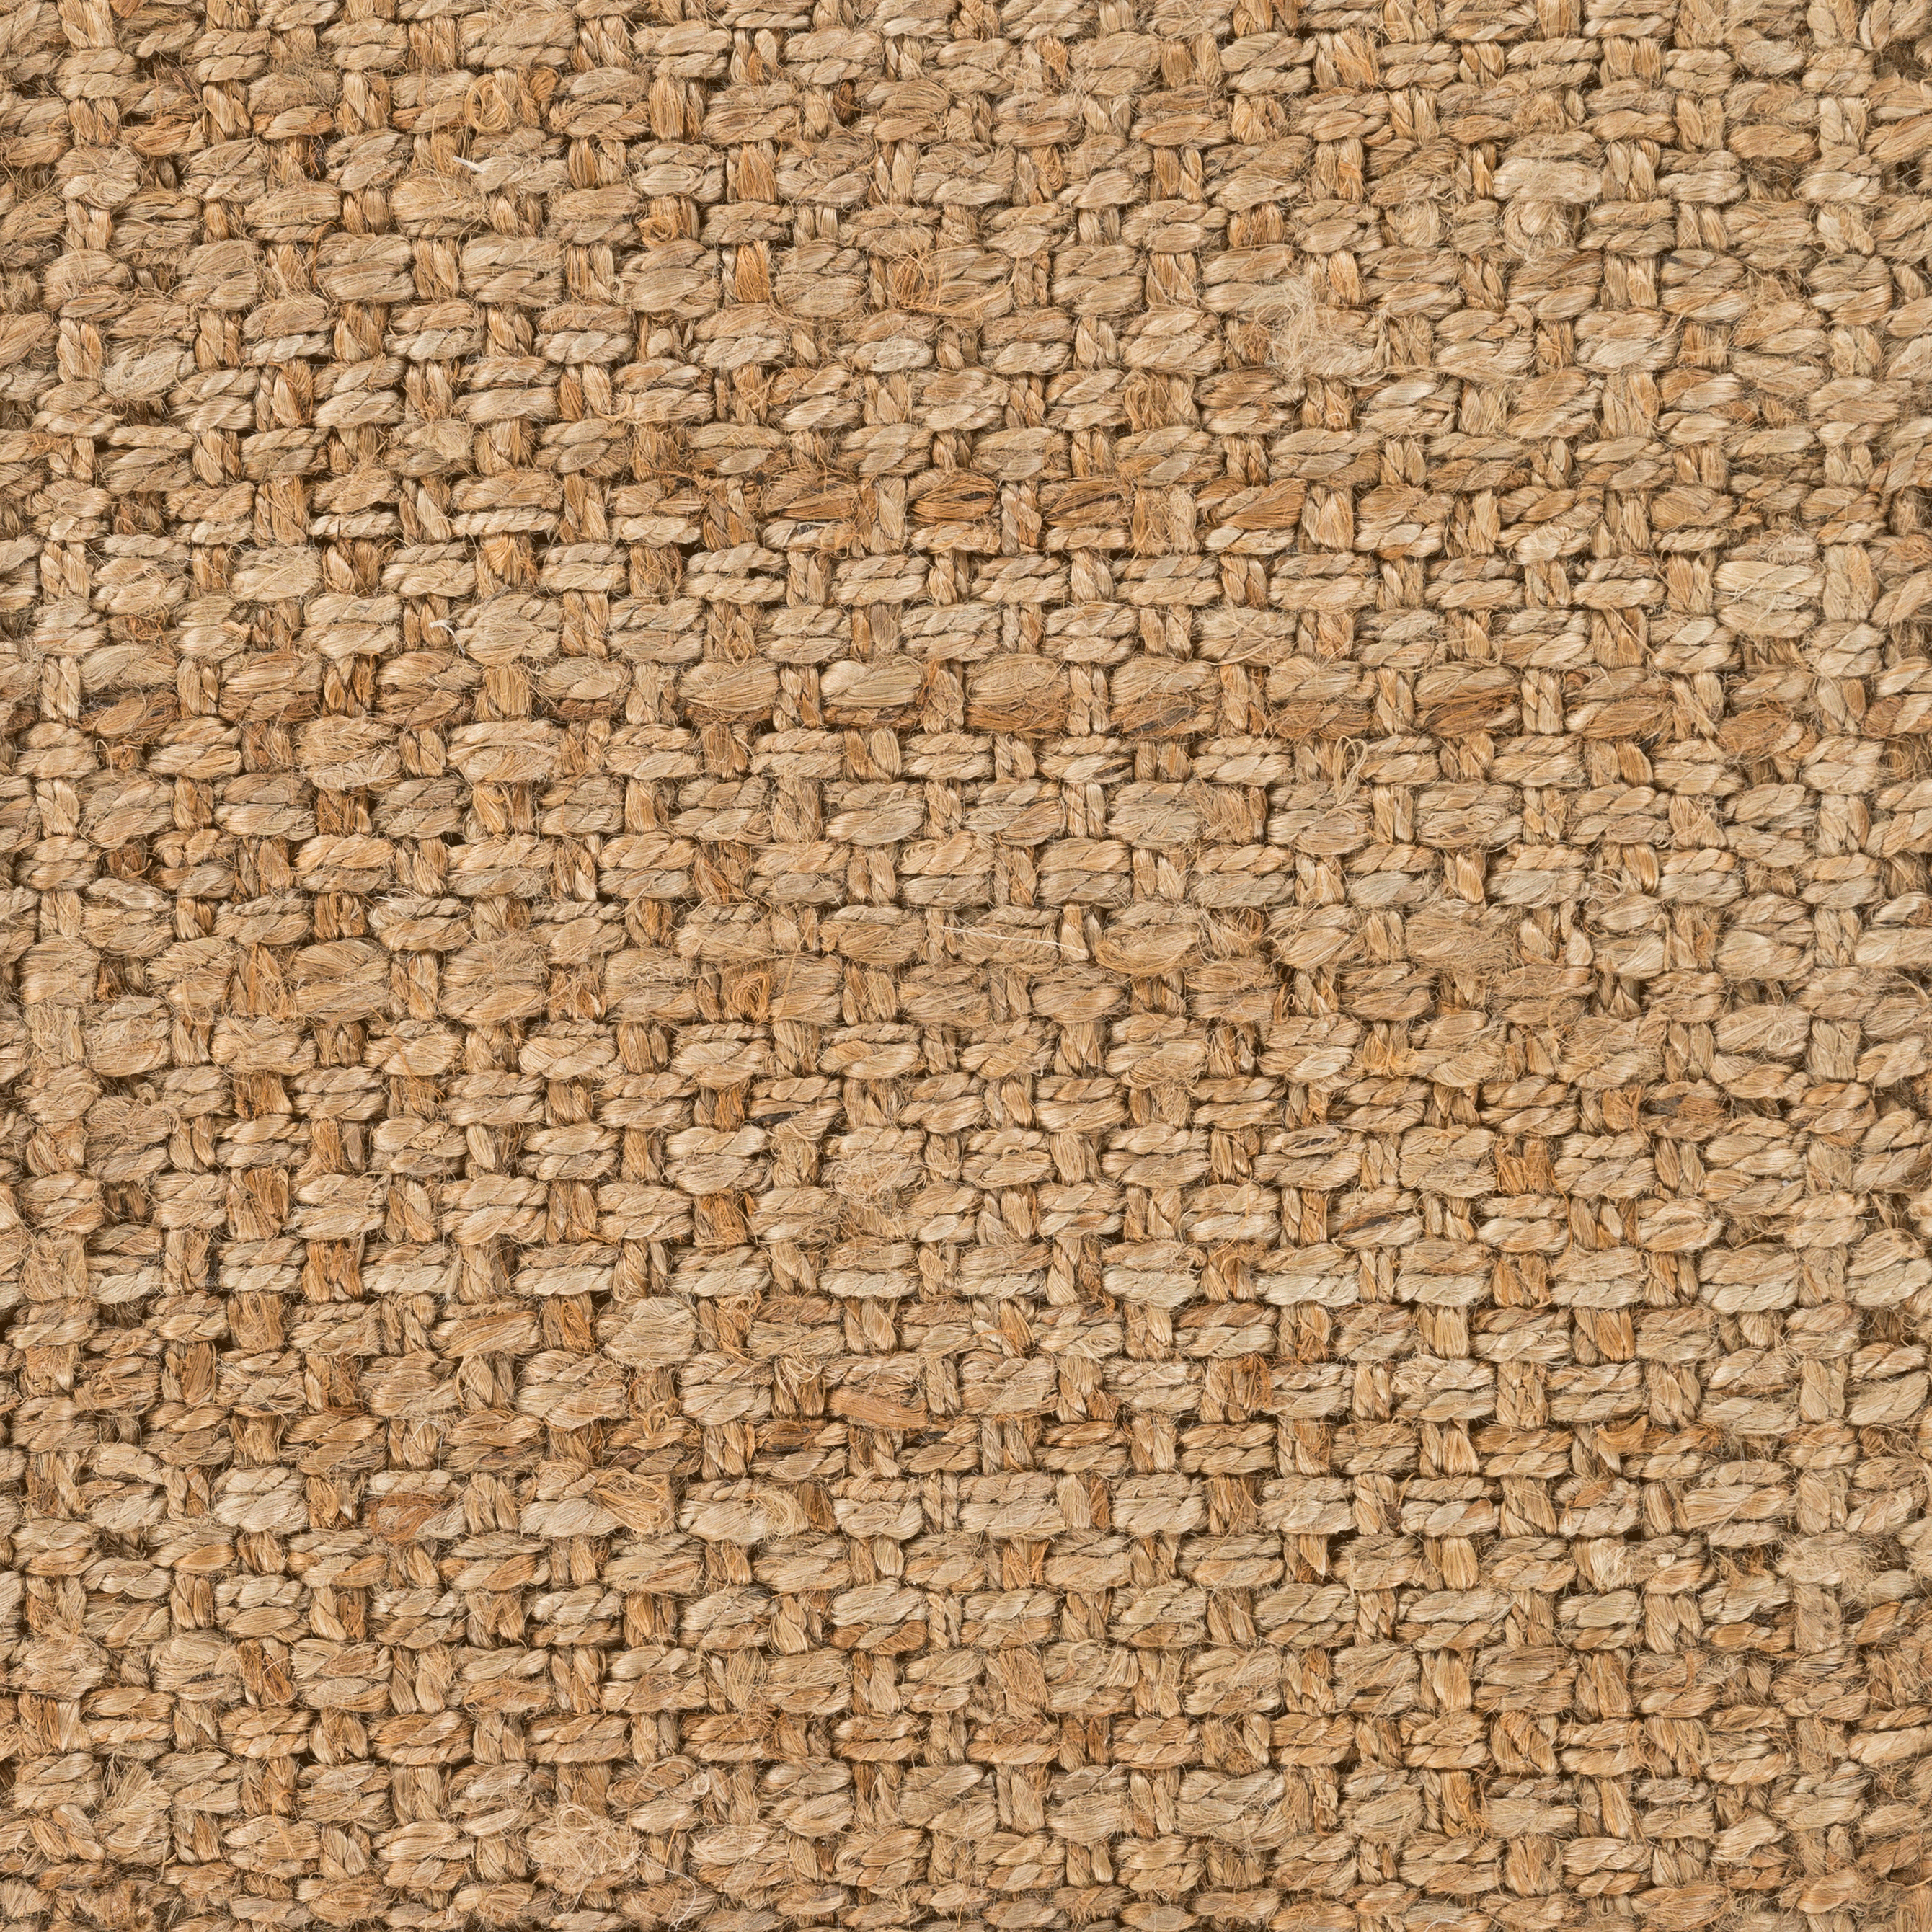 Maine Cottage Thick Jute Rug - Wheat | Maine Cottage¨ 